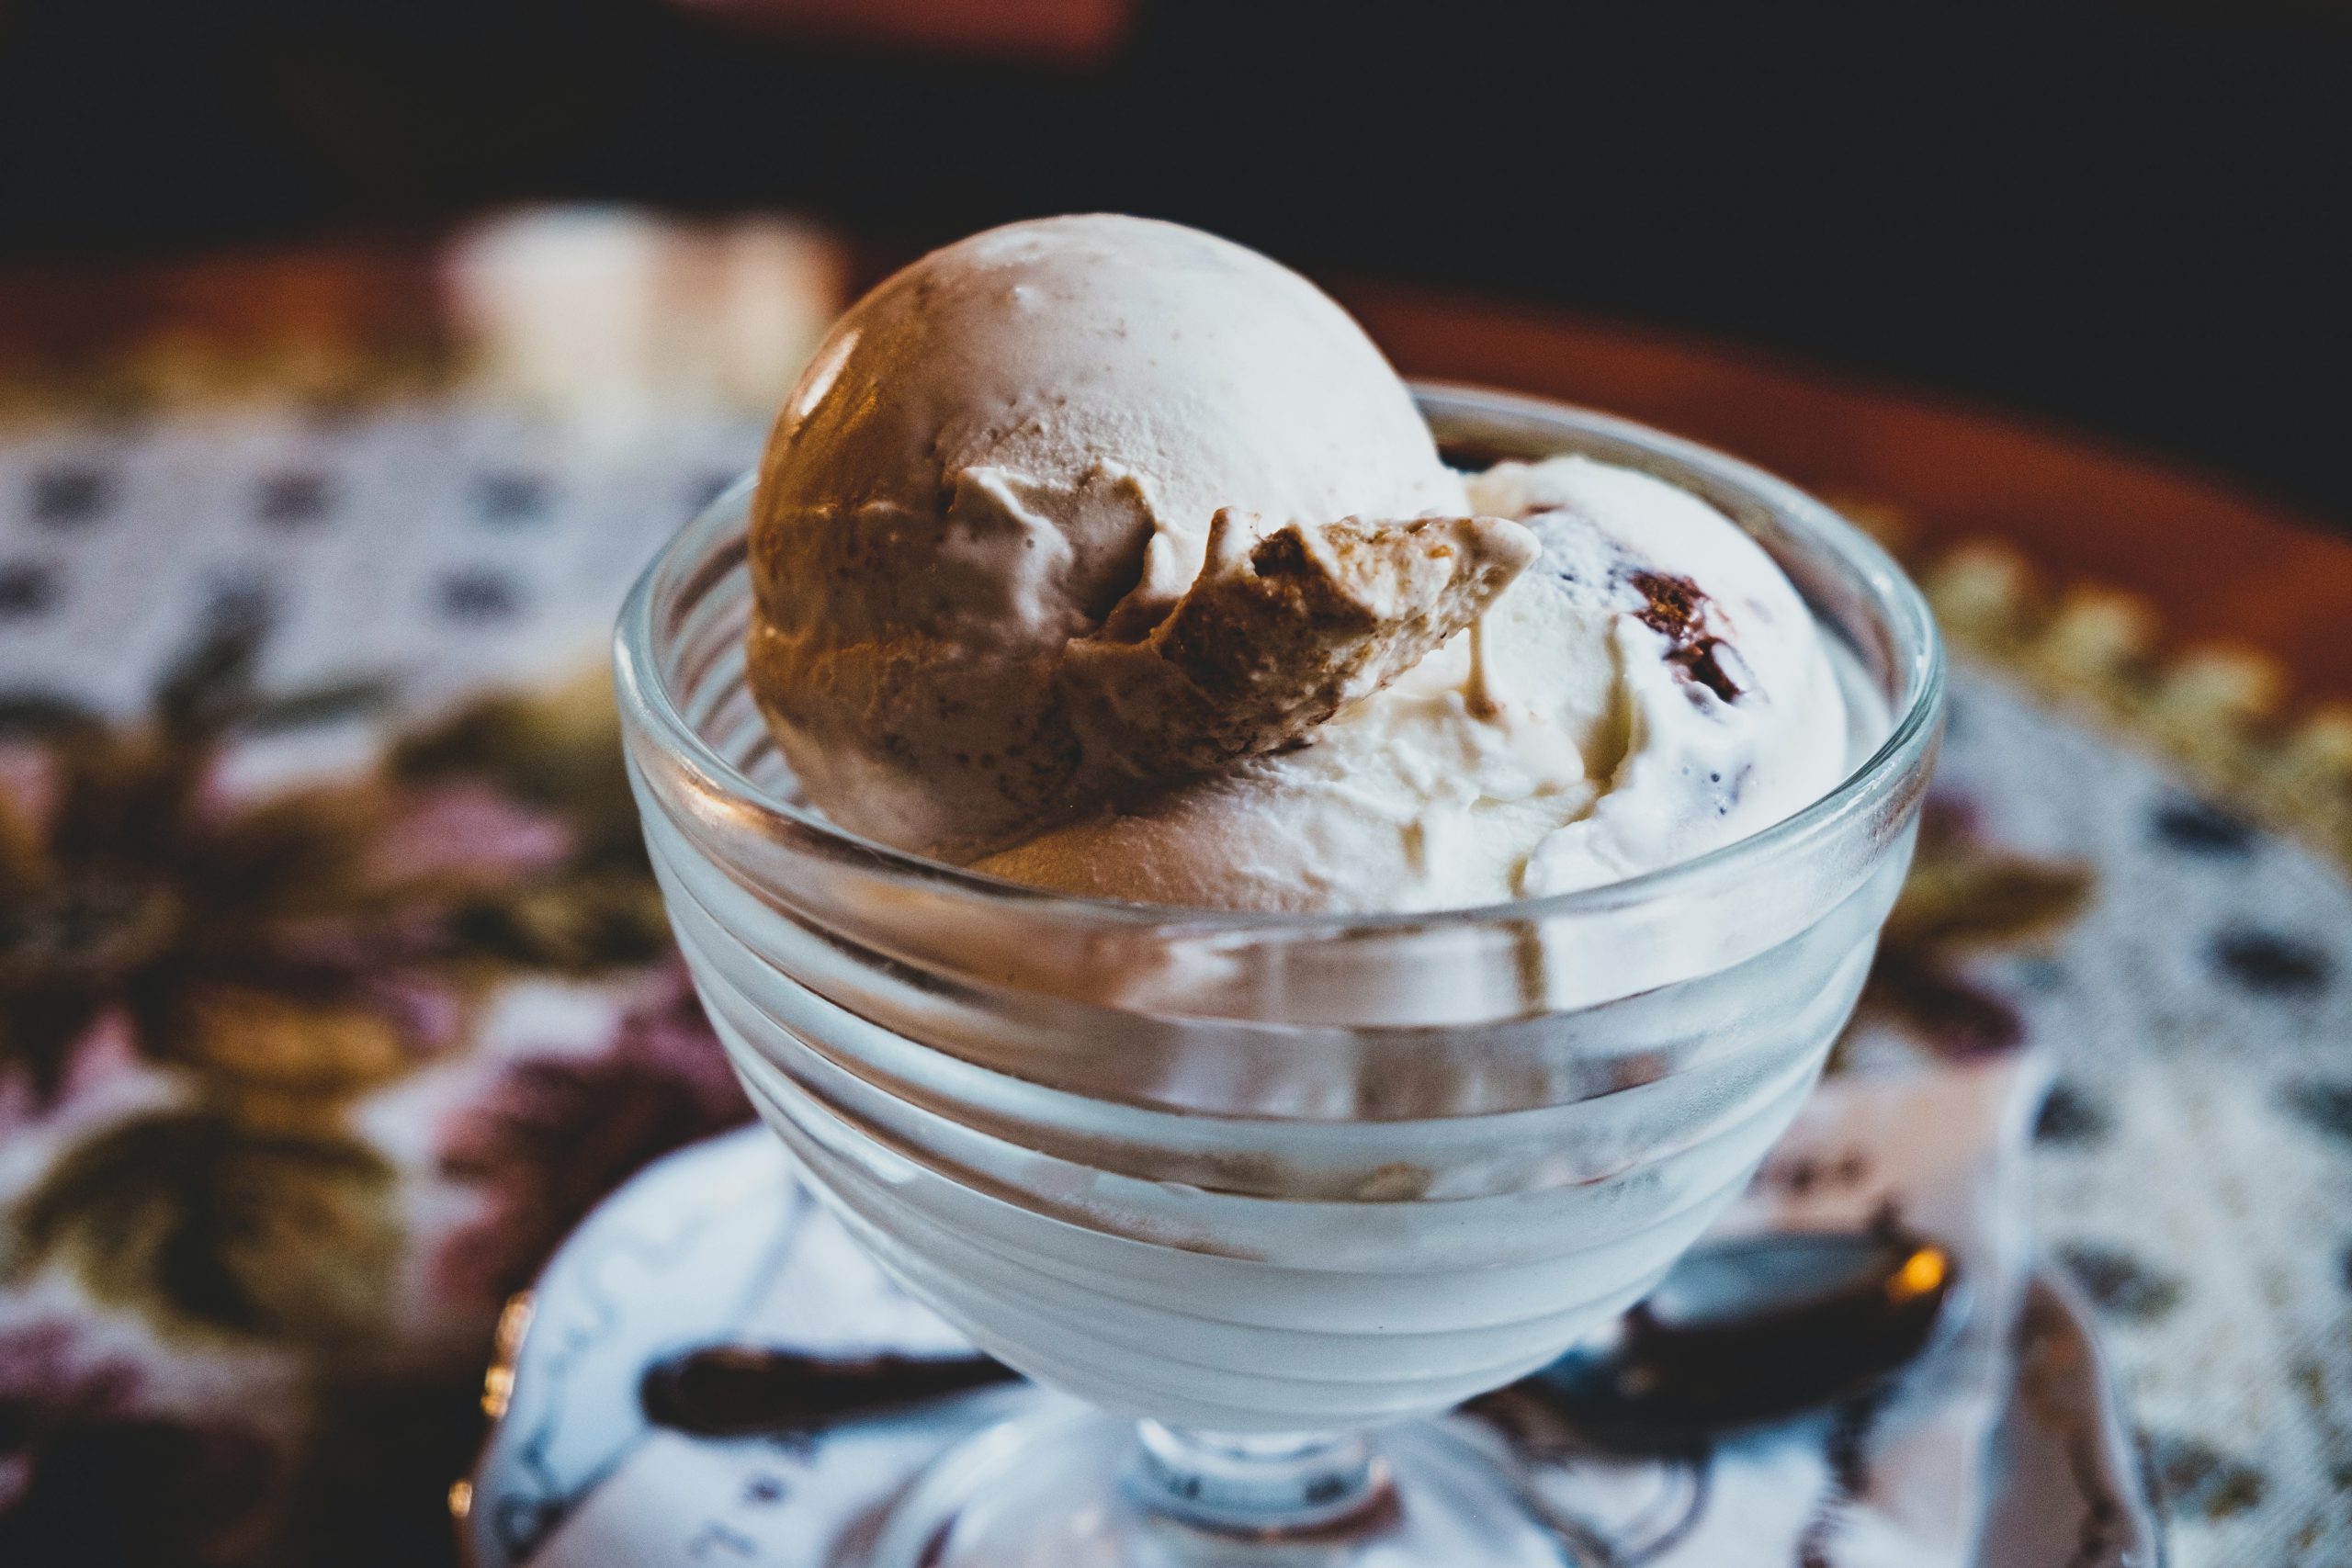 The vanilla flavoured ice-creams were made using vanilla extract that contained more than the permissible levels of ETO. Image credit: Krisztina Papp via Pexels